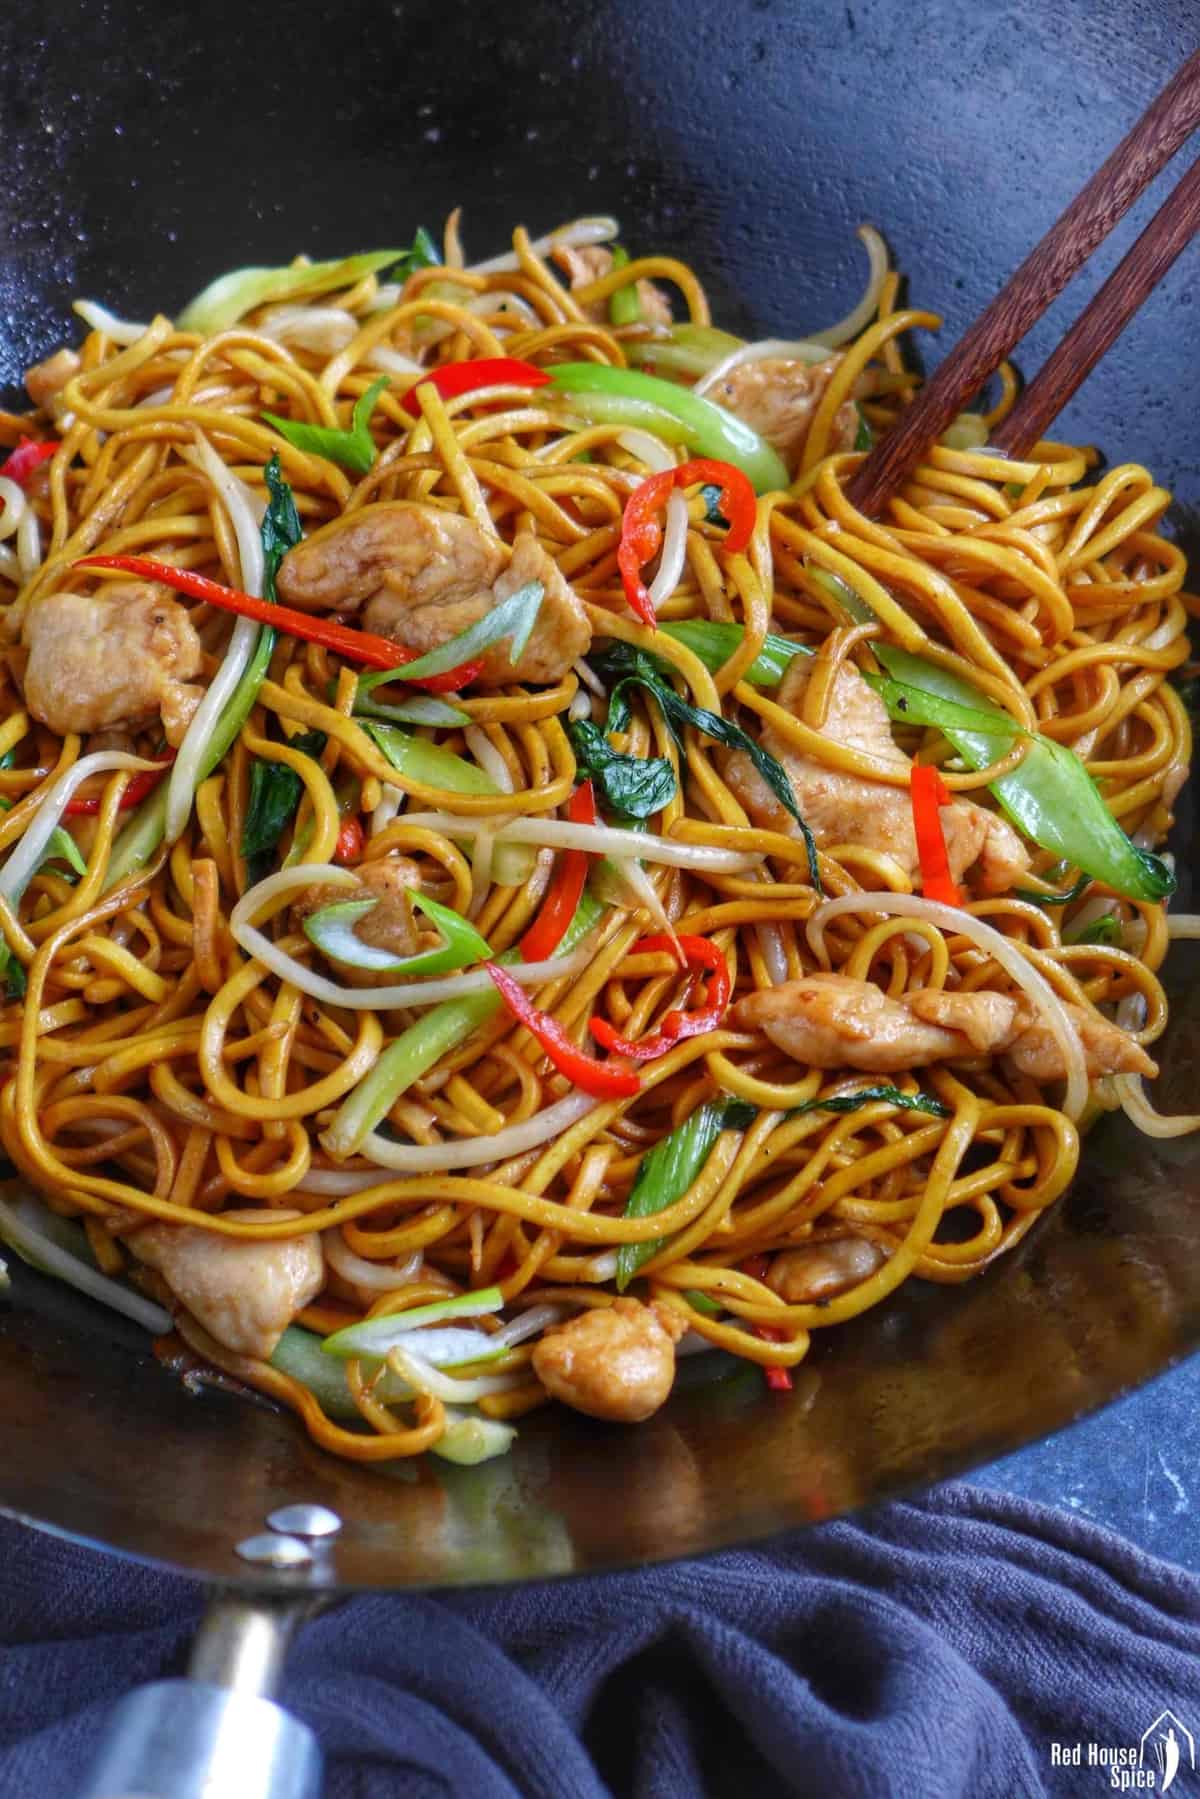 Stir-fried egg noodles with chicken and vegetables